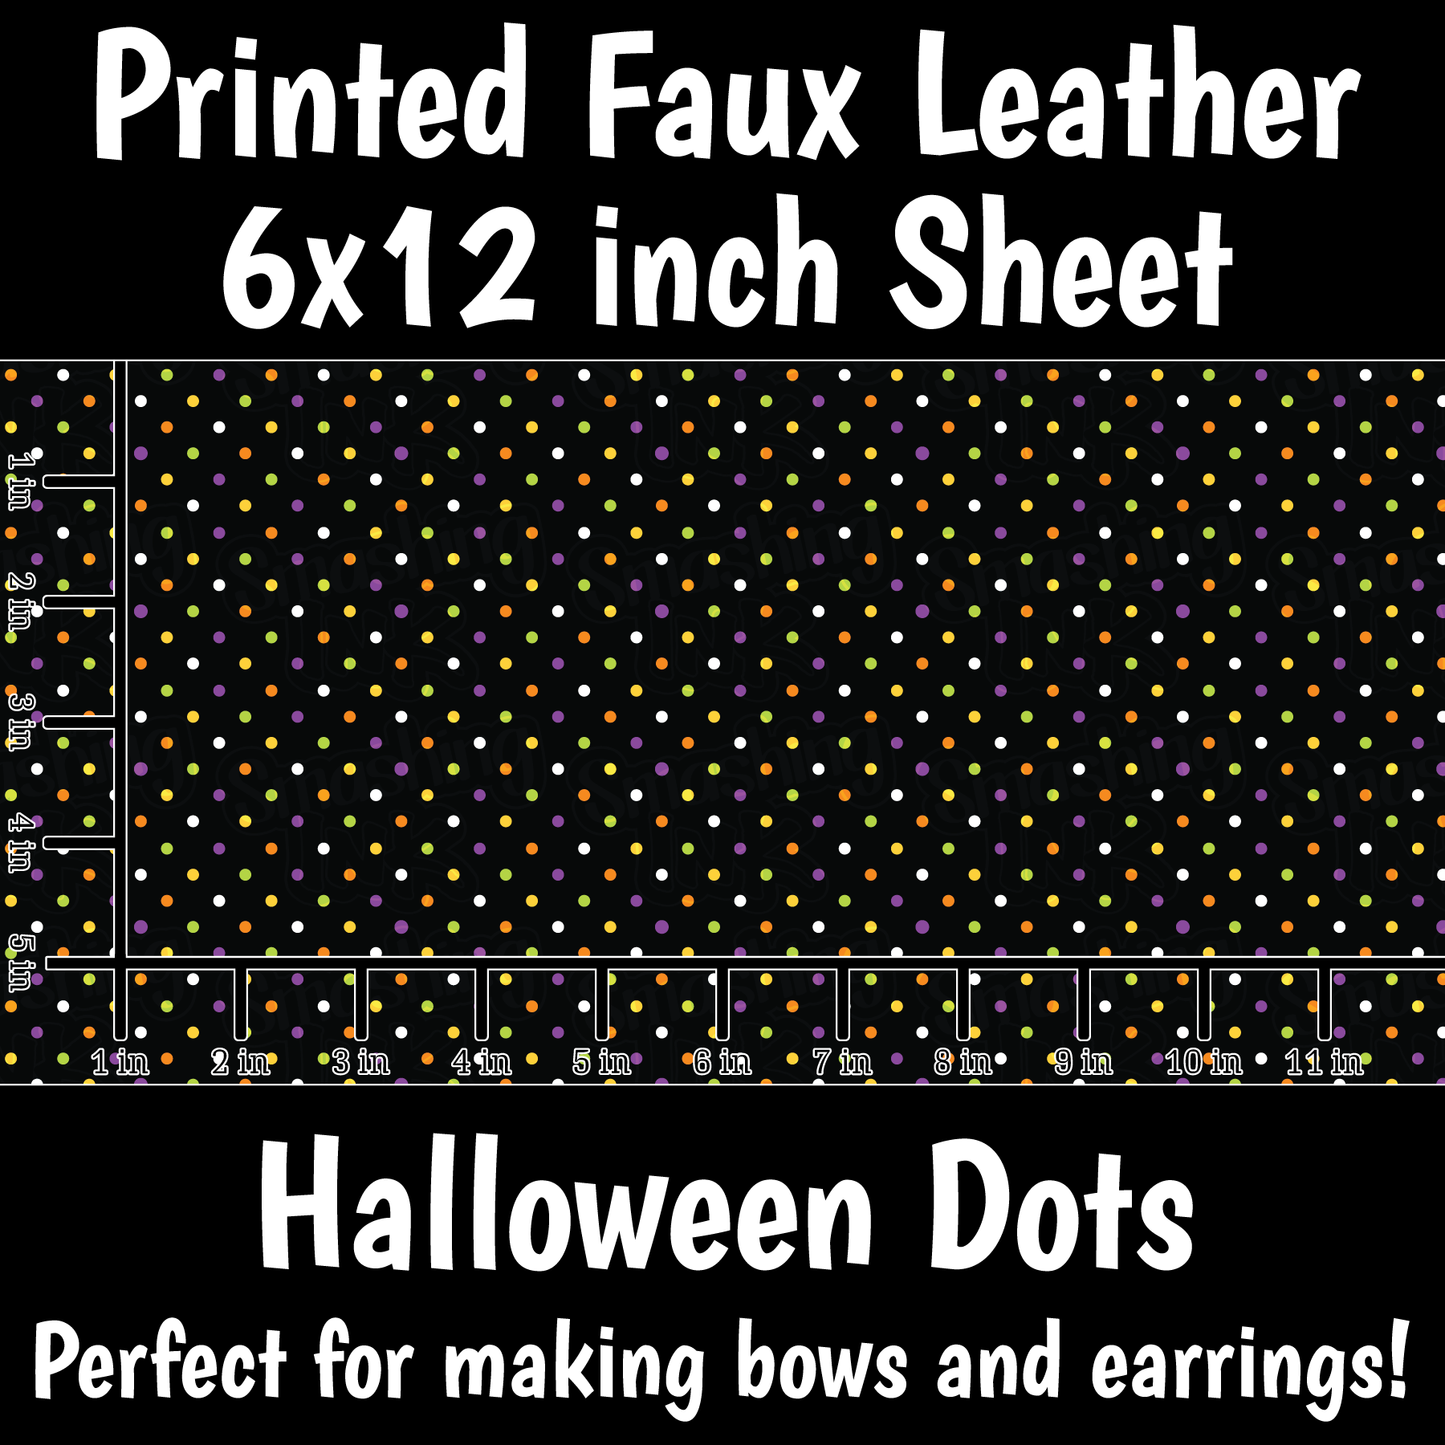 Halloween Dots - Faux Leather Sheet (SHIPS IN 3 BUS DAYS)